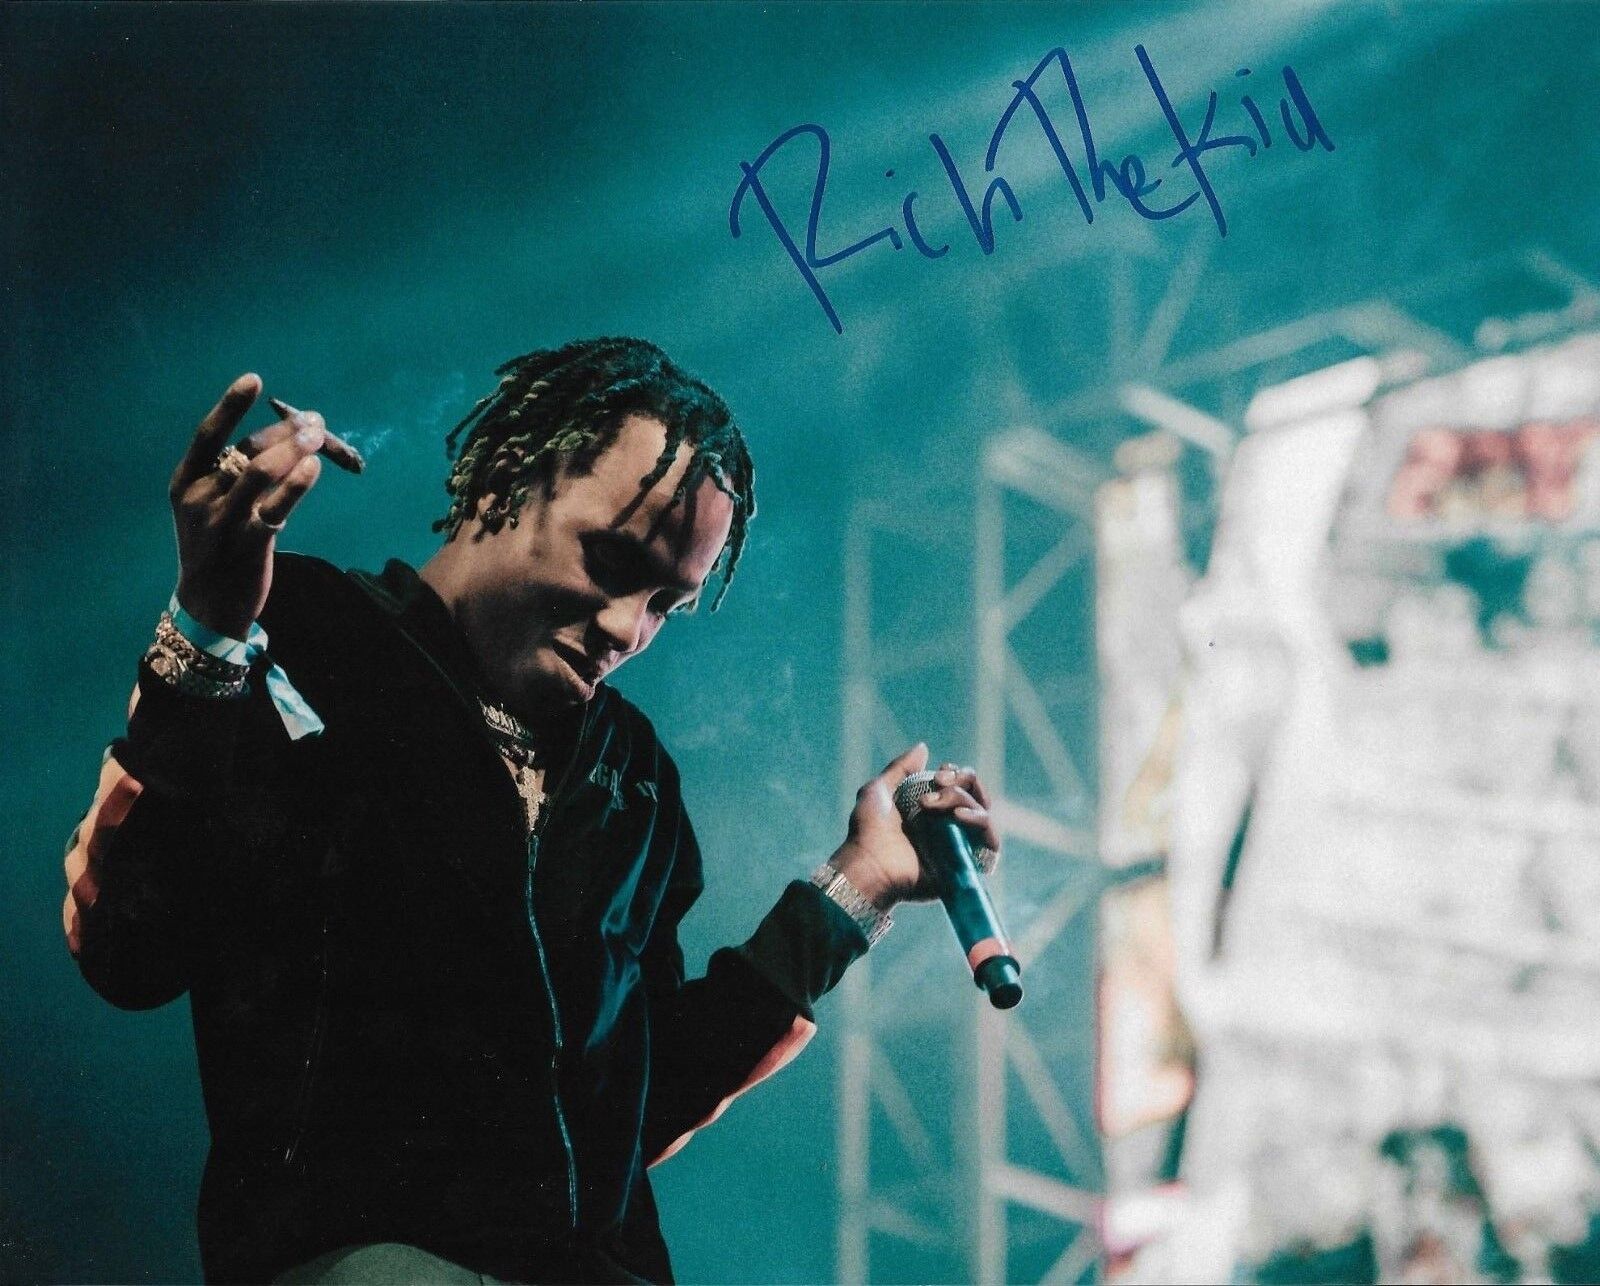 RICH THE KID RAPPER signed THE WORLD IS YOURS 8X10 Photo Poster painting FAMOUS DEX, MIGOS w COA